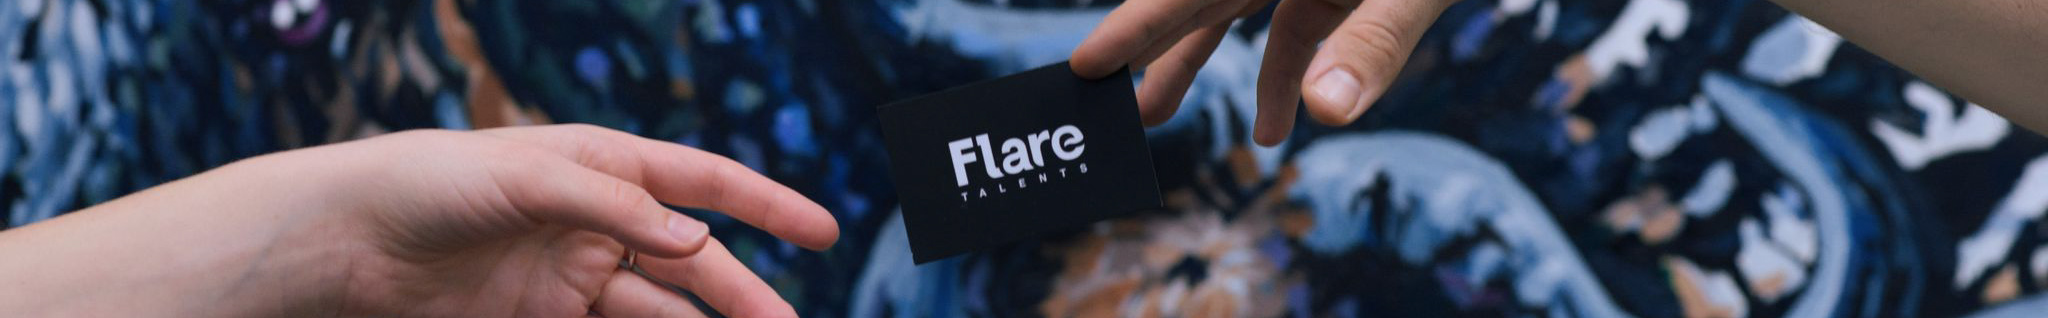 Flare Talents's profile banner